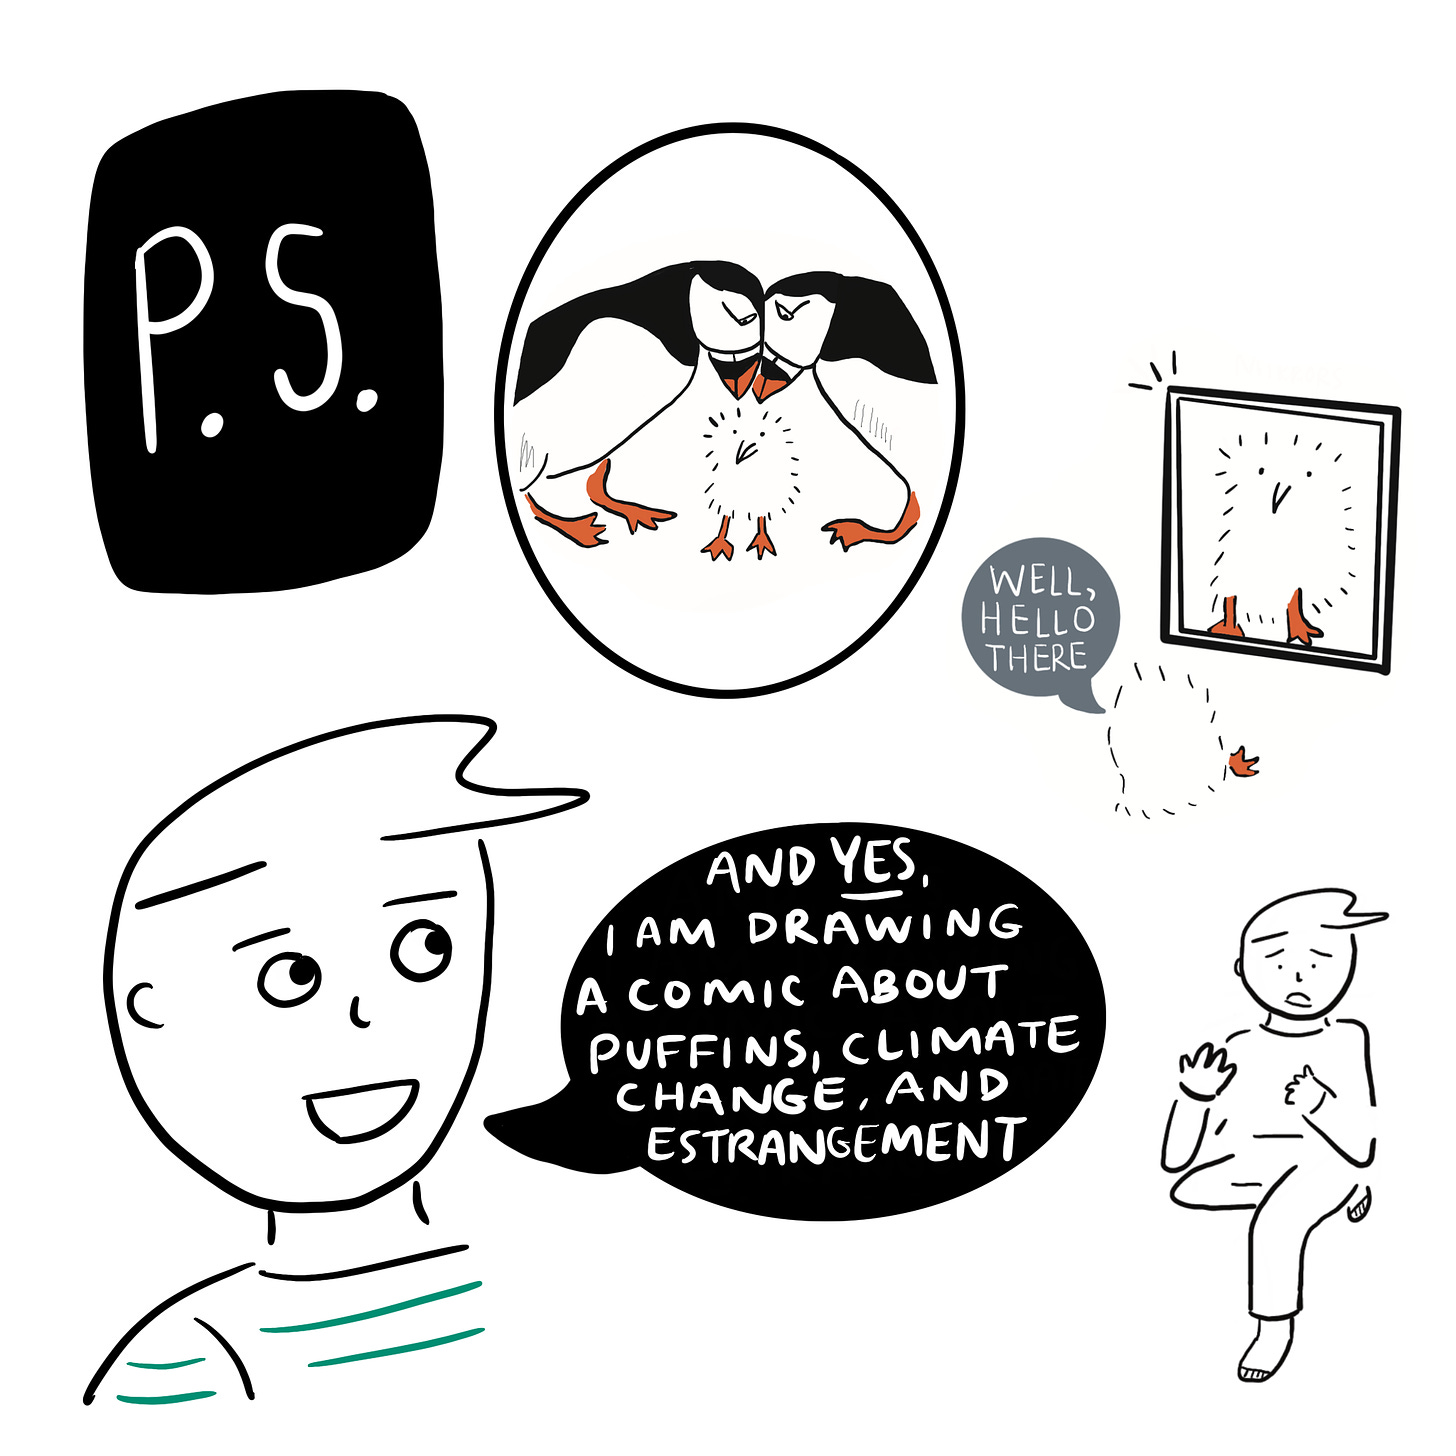 P.S. Image of puffin parents looking down at a puffling. A puffling looking in a mirror saying “well, hello there.” Image of cartoonist sitting with leg folded under other leg, gesturing, looking upset. Cartoonist gazing at images, saying “and yes, I am drawing a comic about puffins, climate change, and estrangement.”  